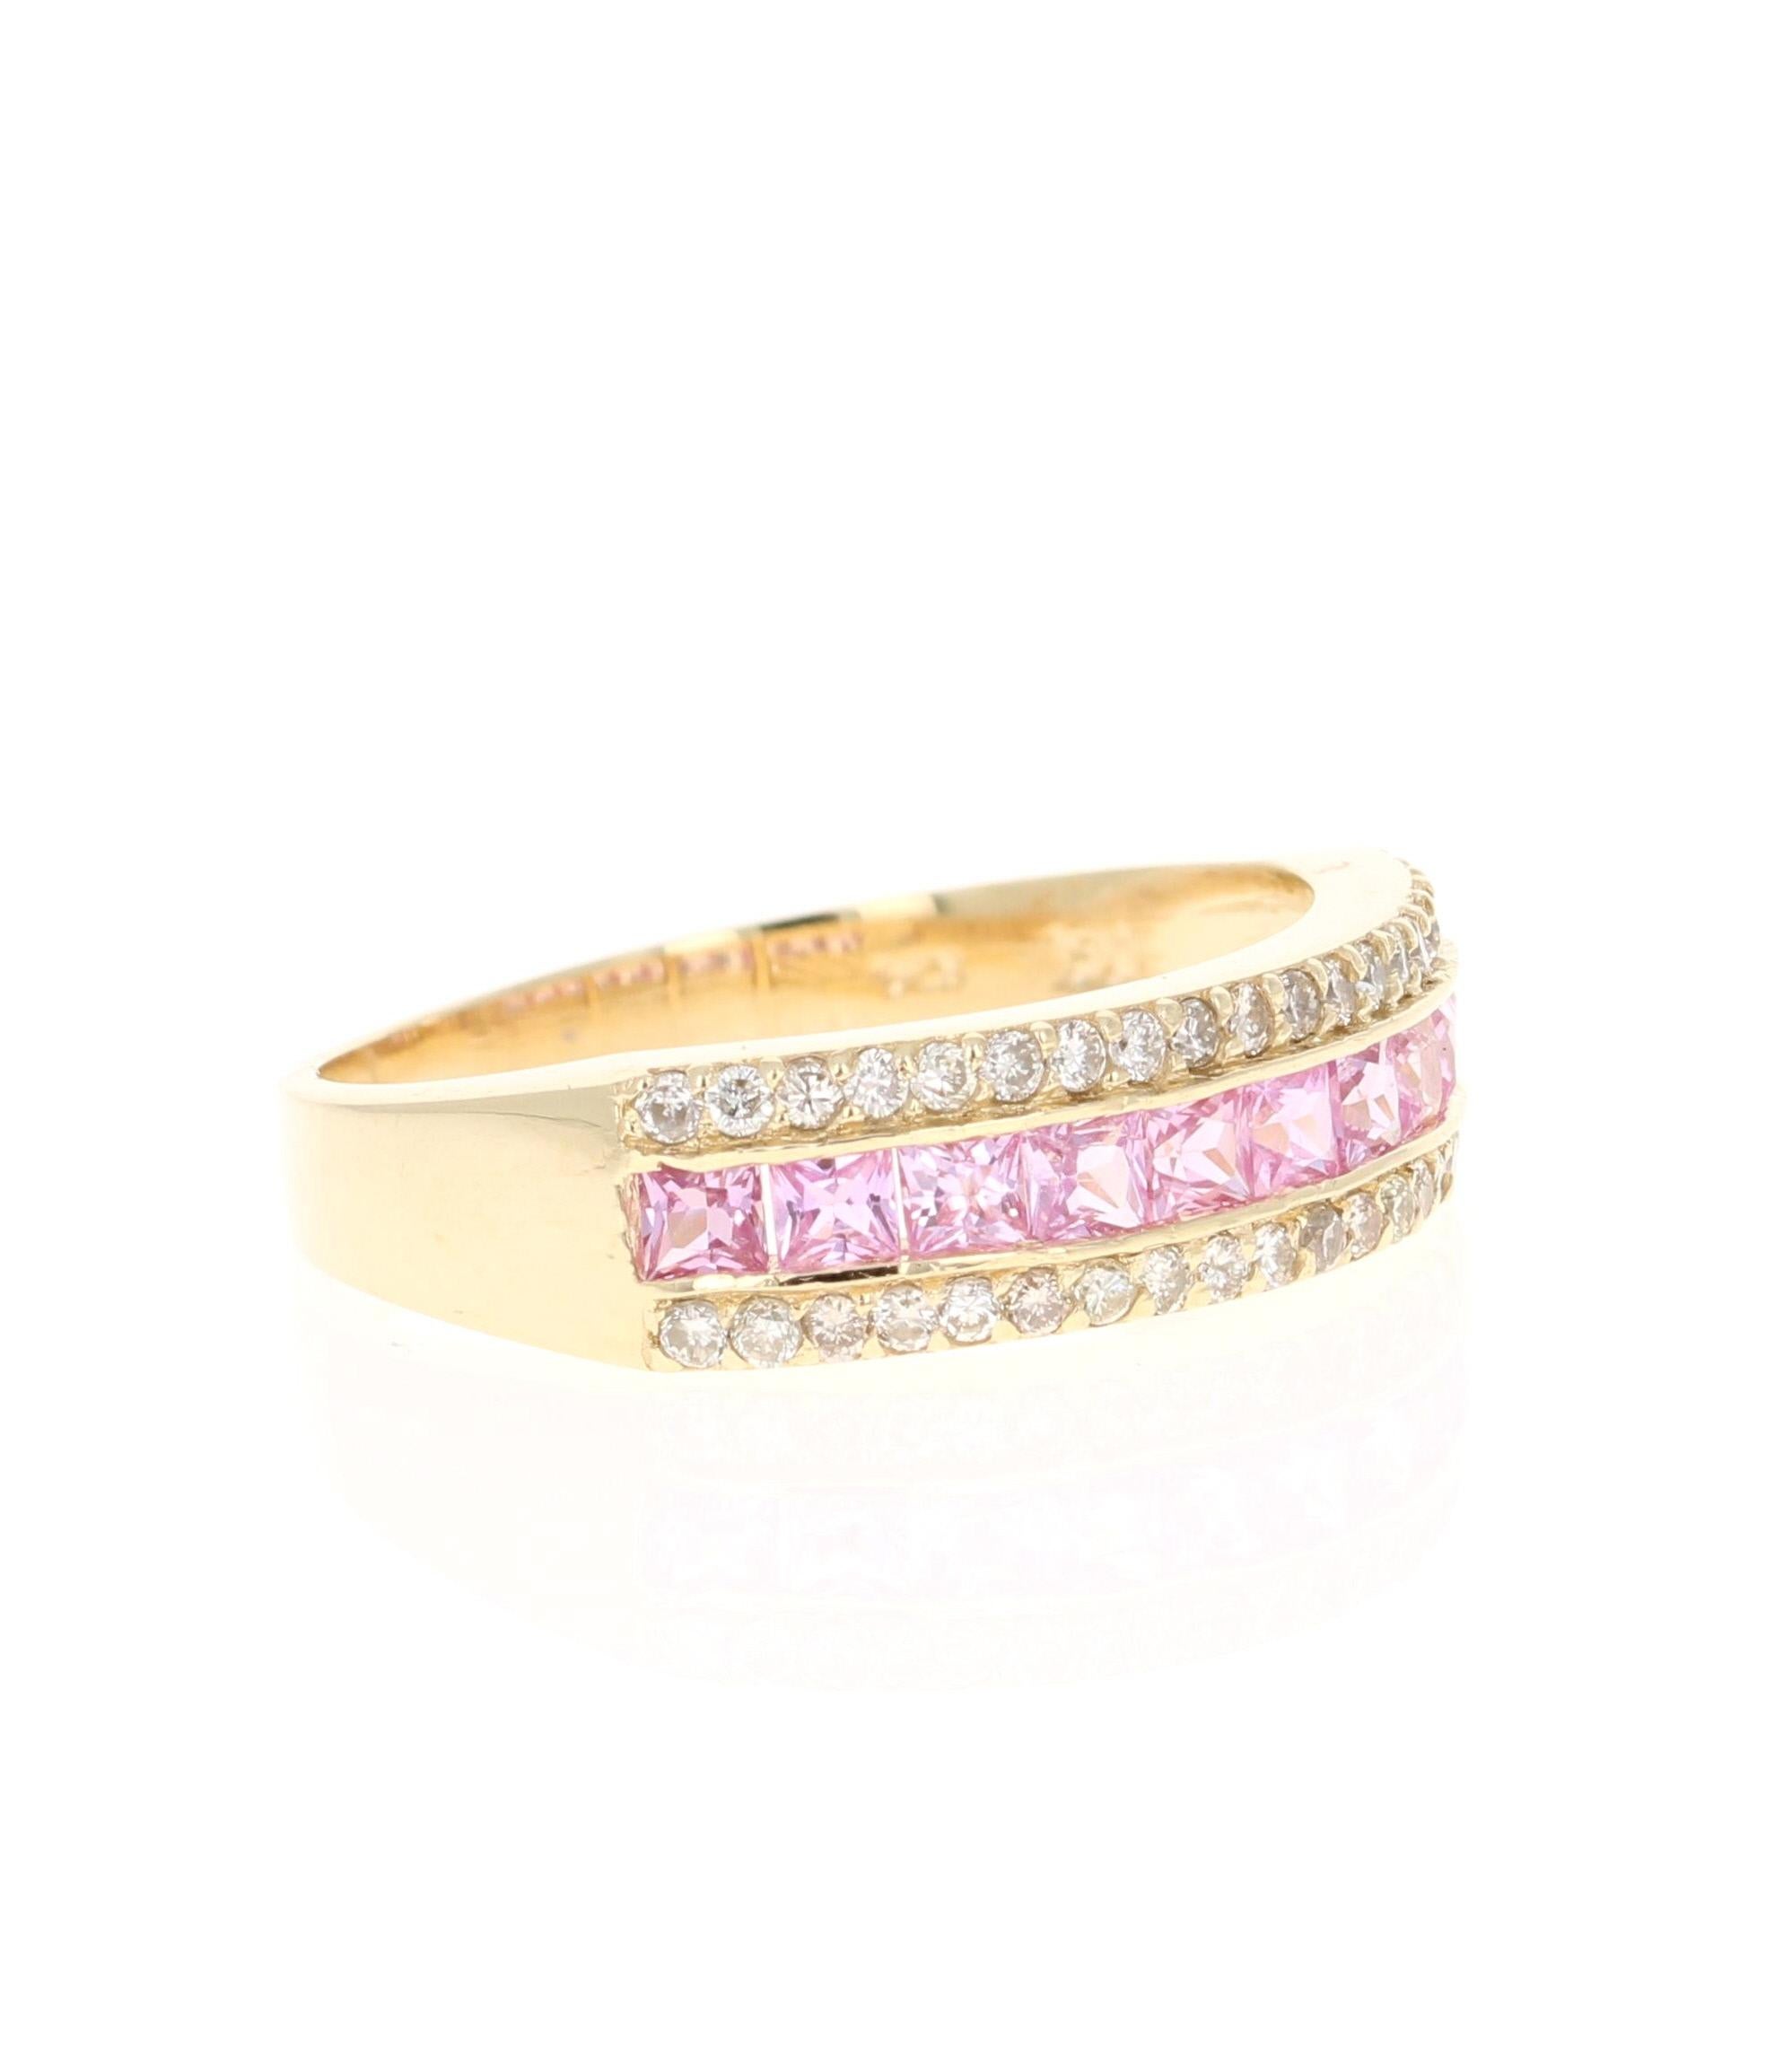 This ring has 11 Natural Pink Sapphires that weigh 0.87 carats and 40 Natural Round Cut Diamonds that weigh 0.30 carats (Clarity: SI, Color: F) The total carat weight of the band is 1.17 carats.

The band is made in 14 Karat Yellow Gold and weighs